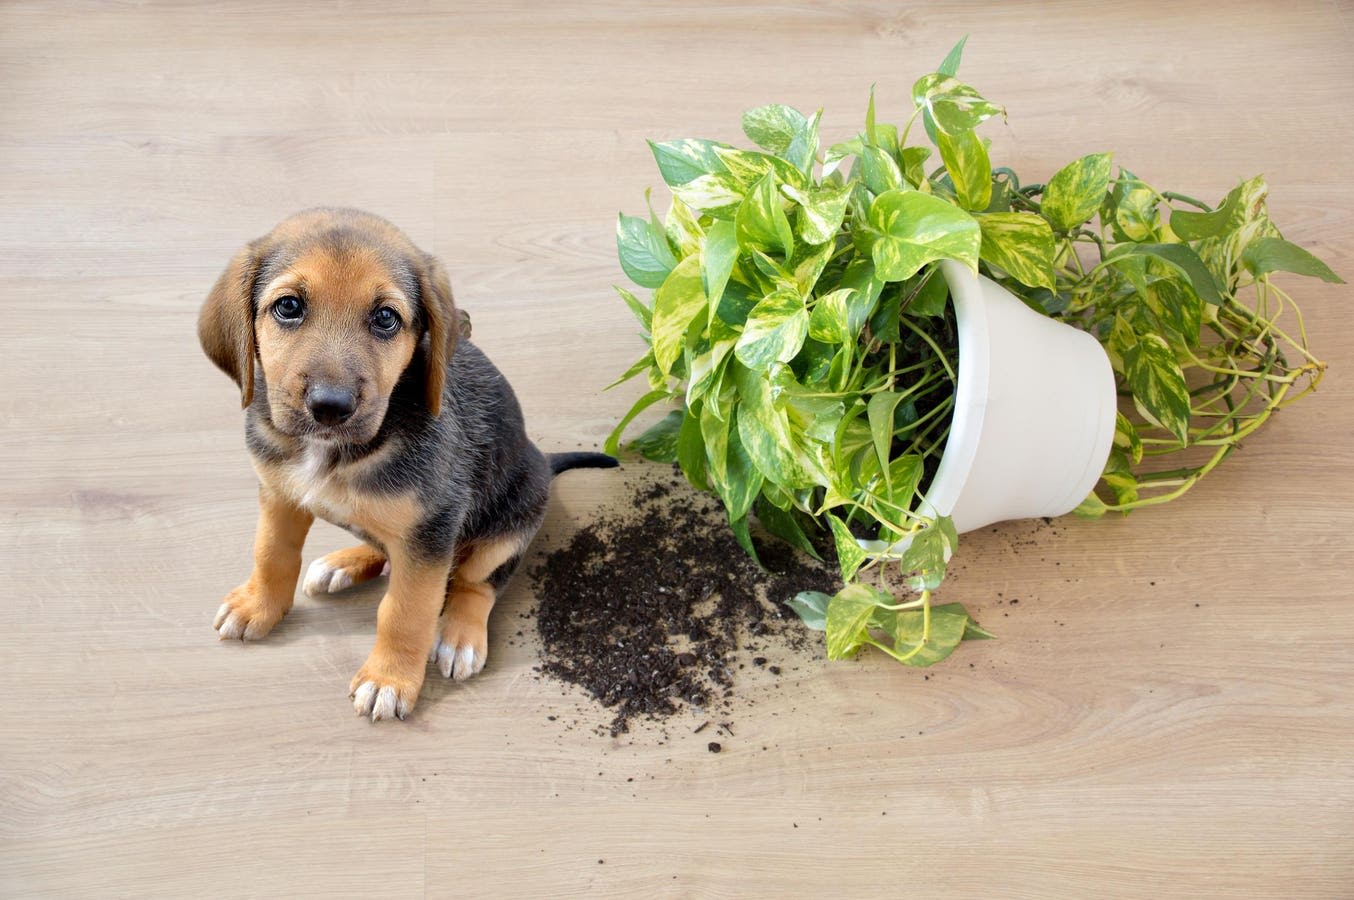 Wellness Design Goes To The Dogs—16 Pro Tips For Pup Safety